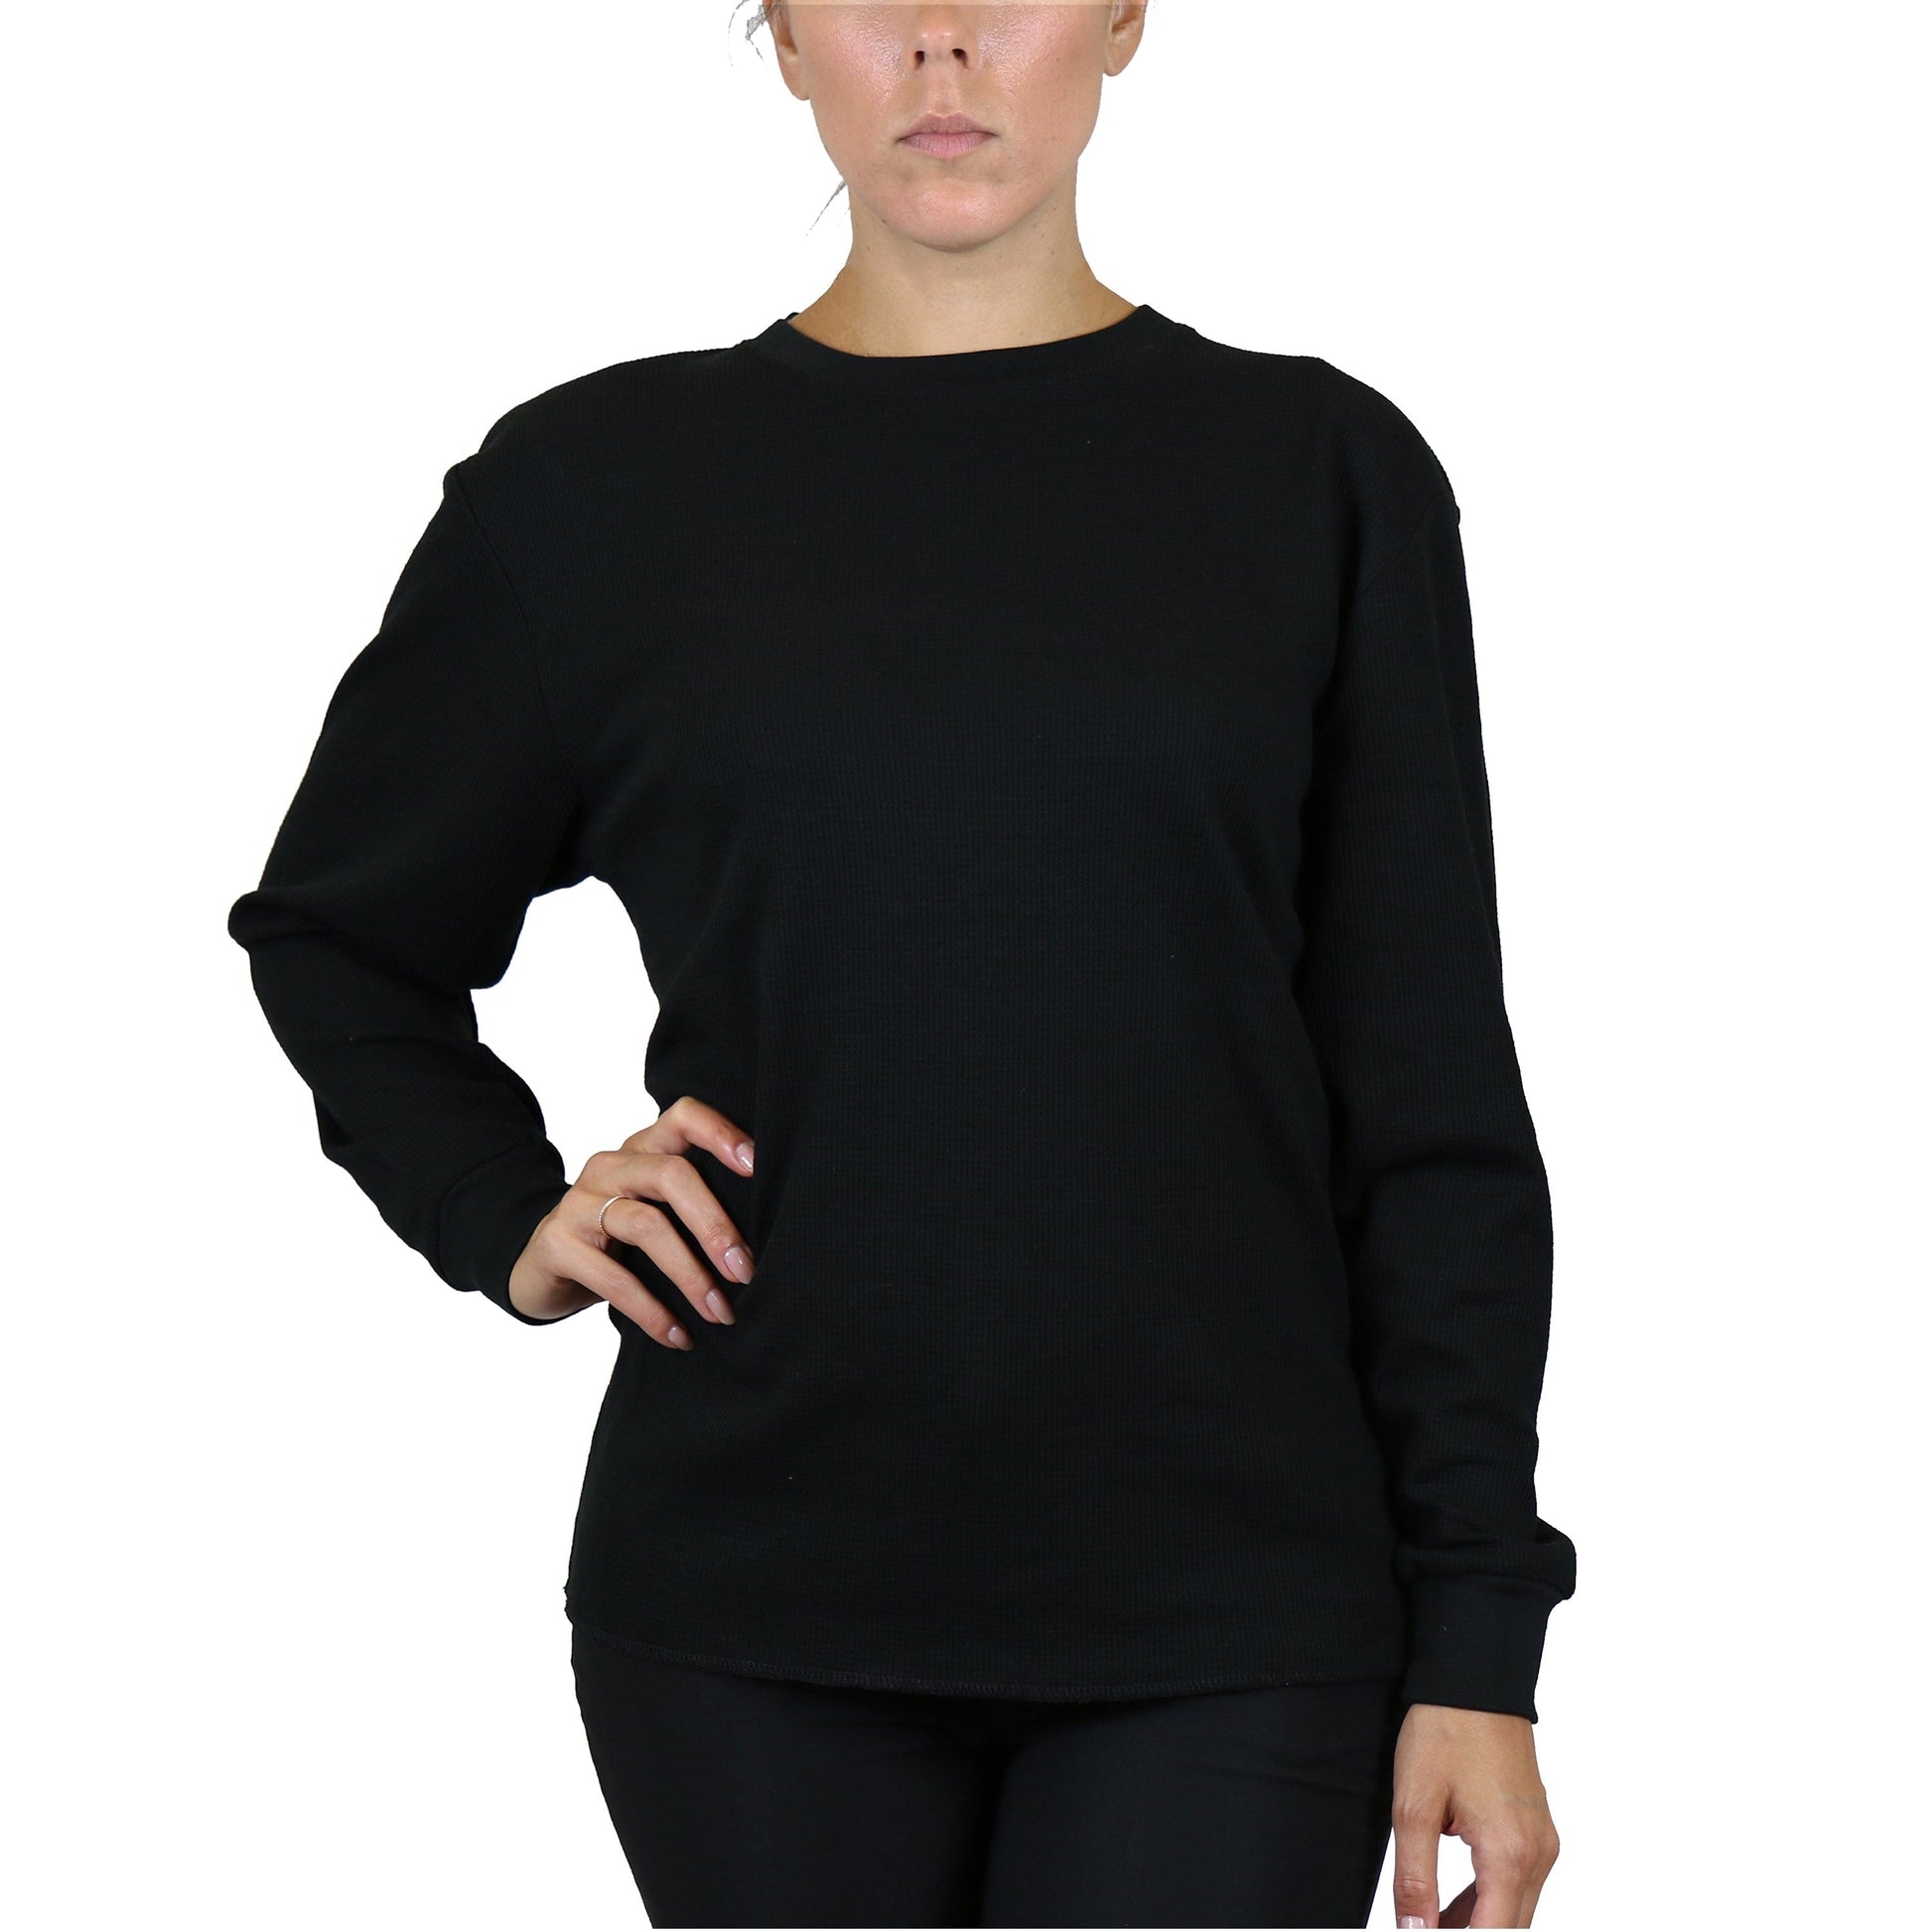 Women's Long Sleeve Oversize Loose Fit Thermal Shirts (Sizes, S-5XL) –  GalaxybyHarvic